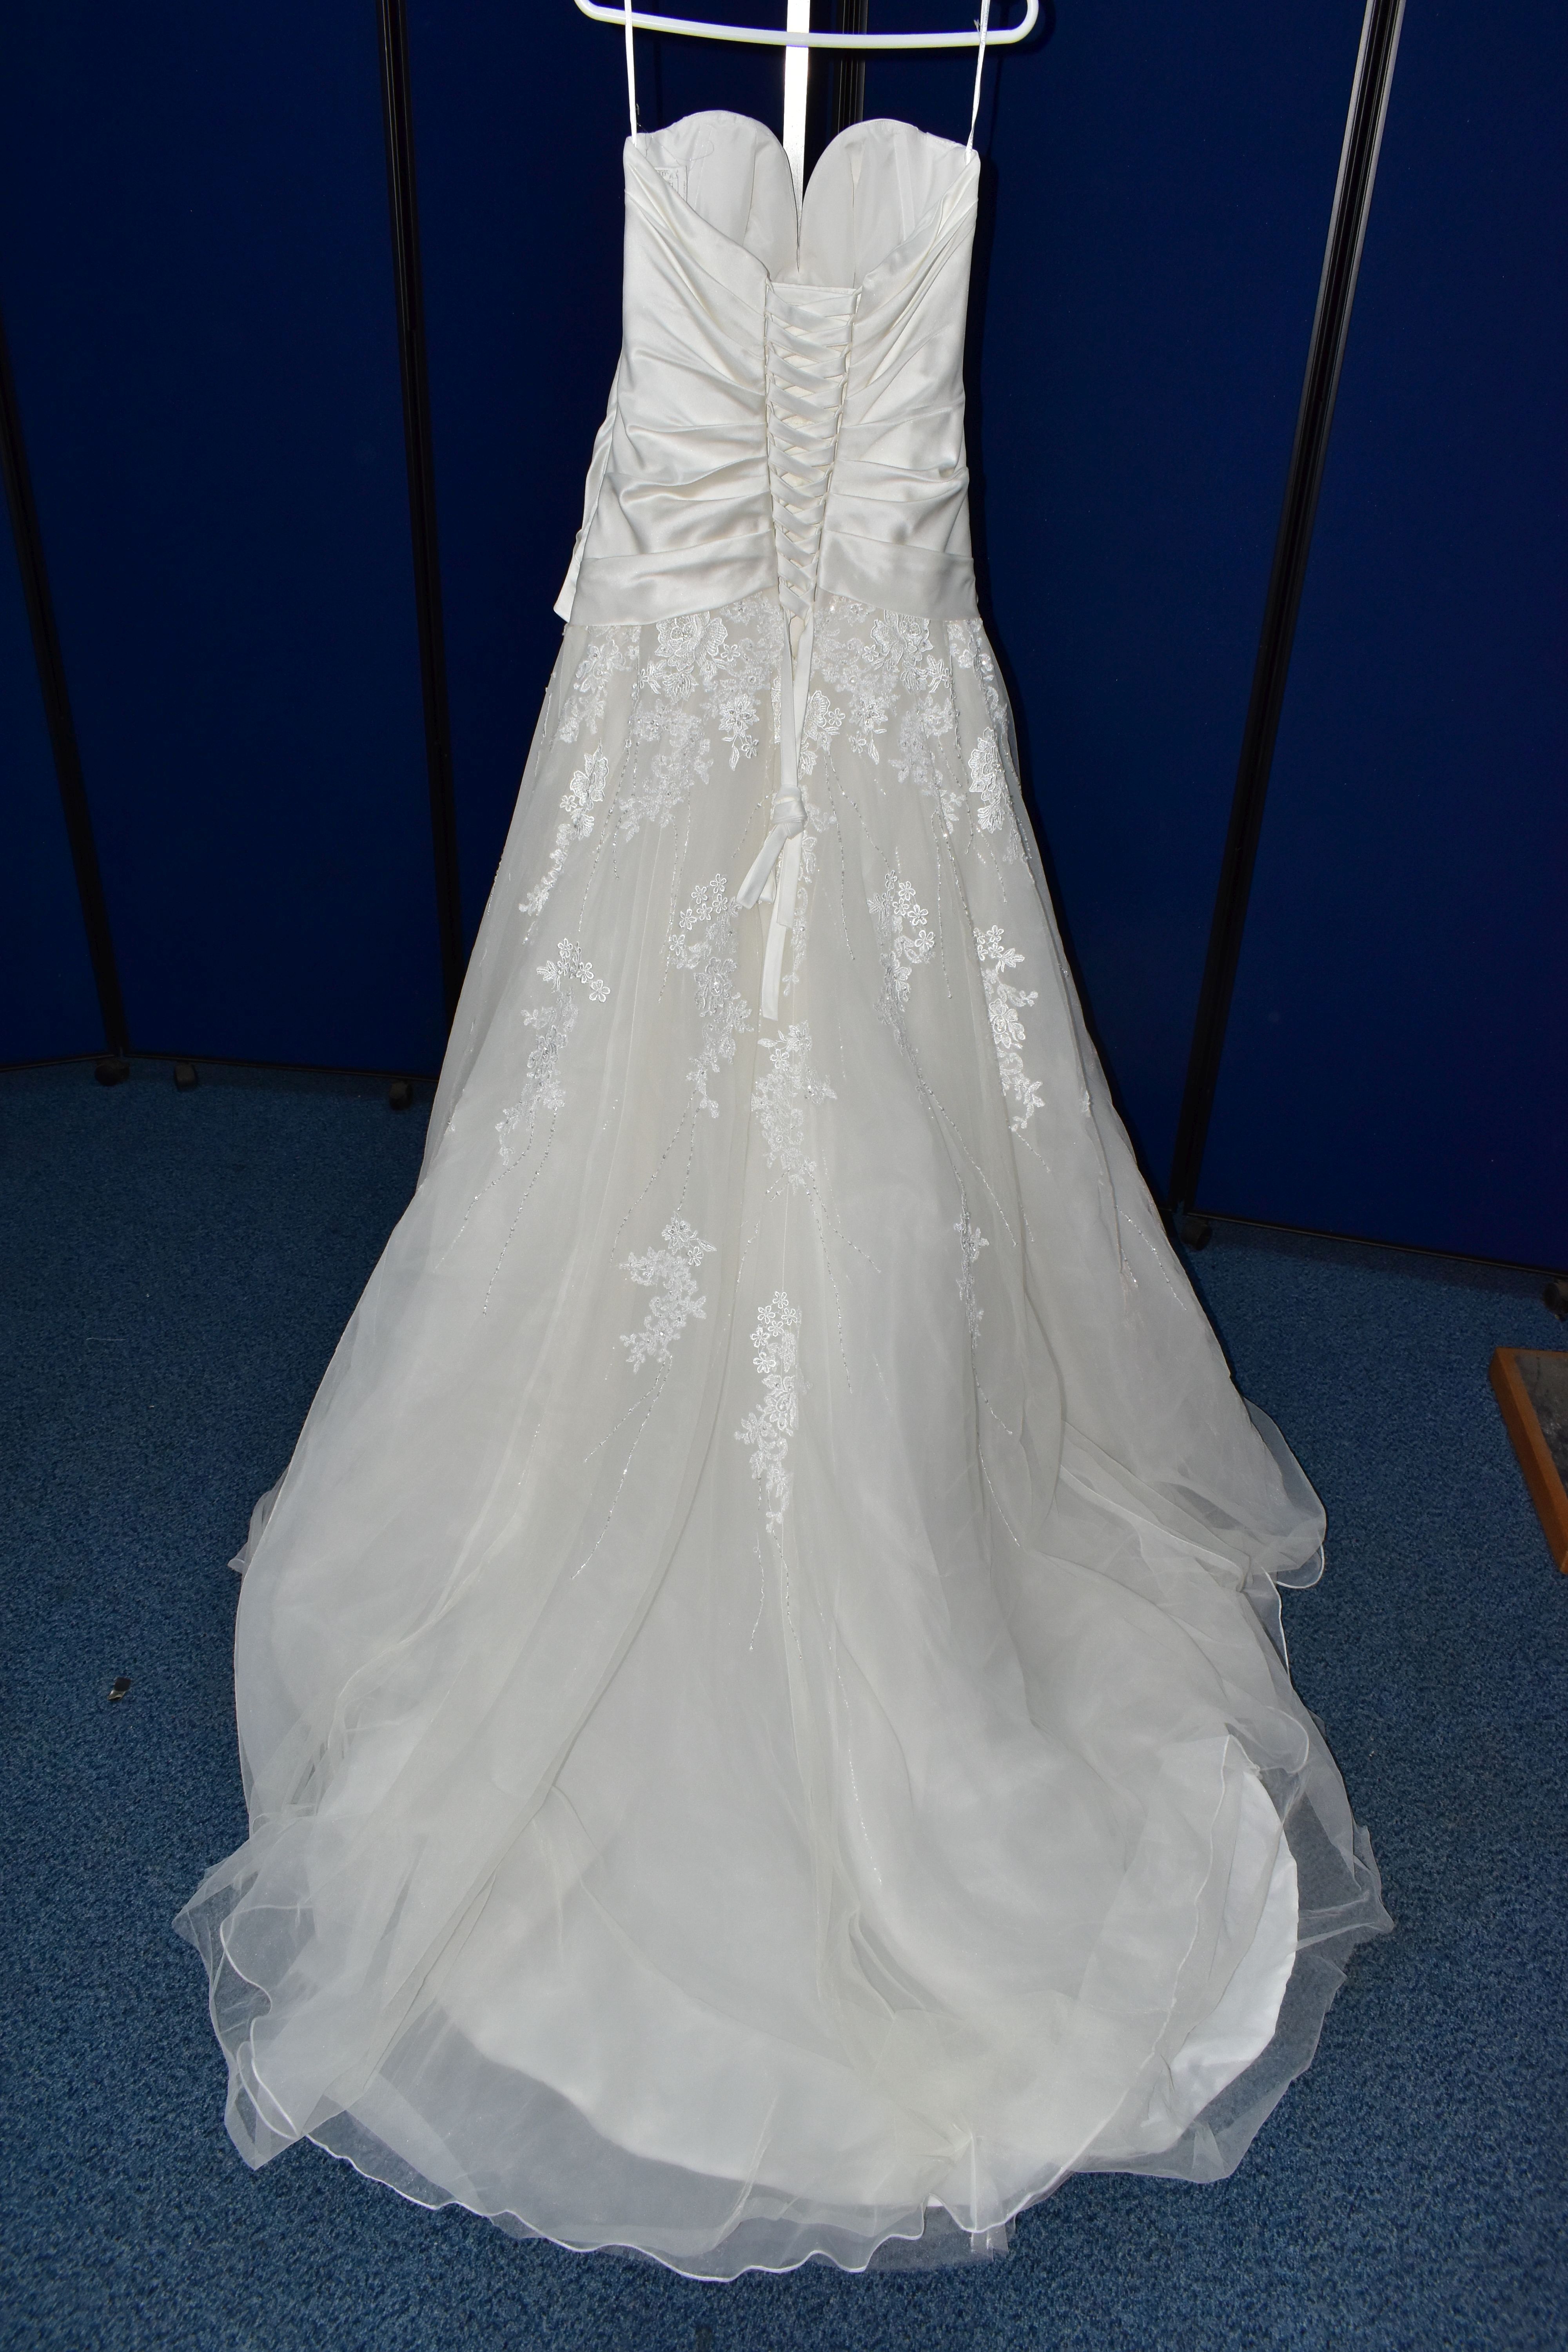 WEDDING DRESS, 'Sophia Tolli' ivory satin and tulle, very long train, off the shoulder, beaded - Image 9 of 12